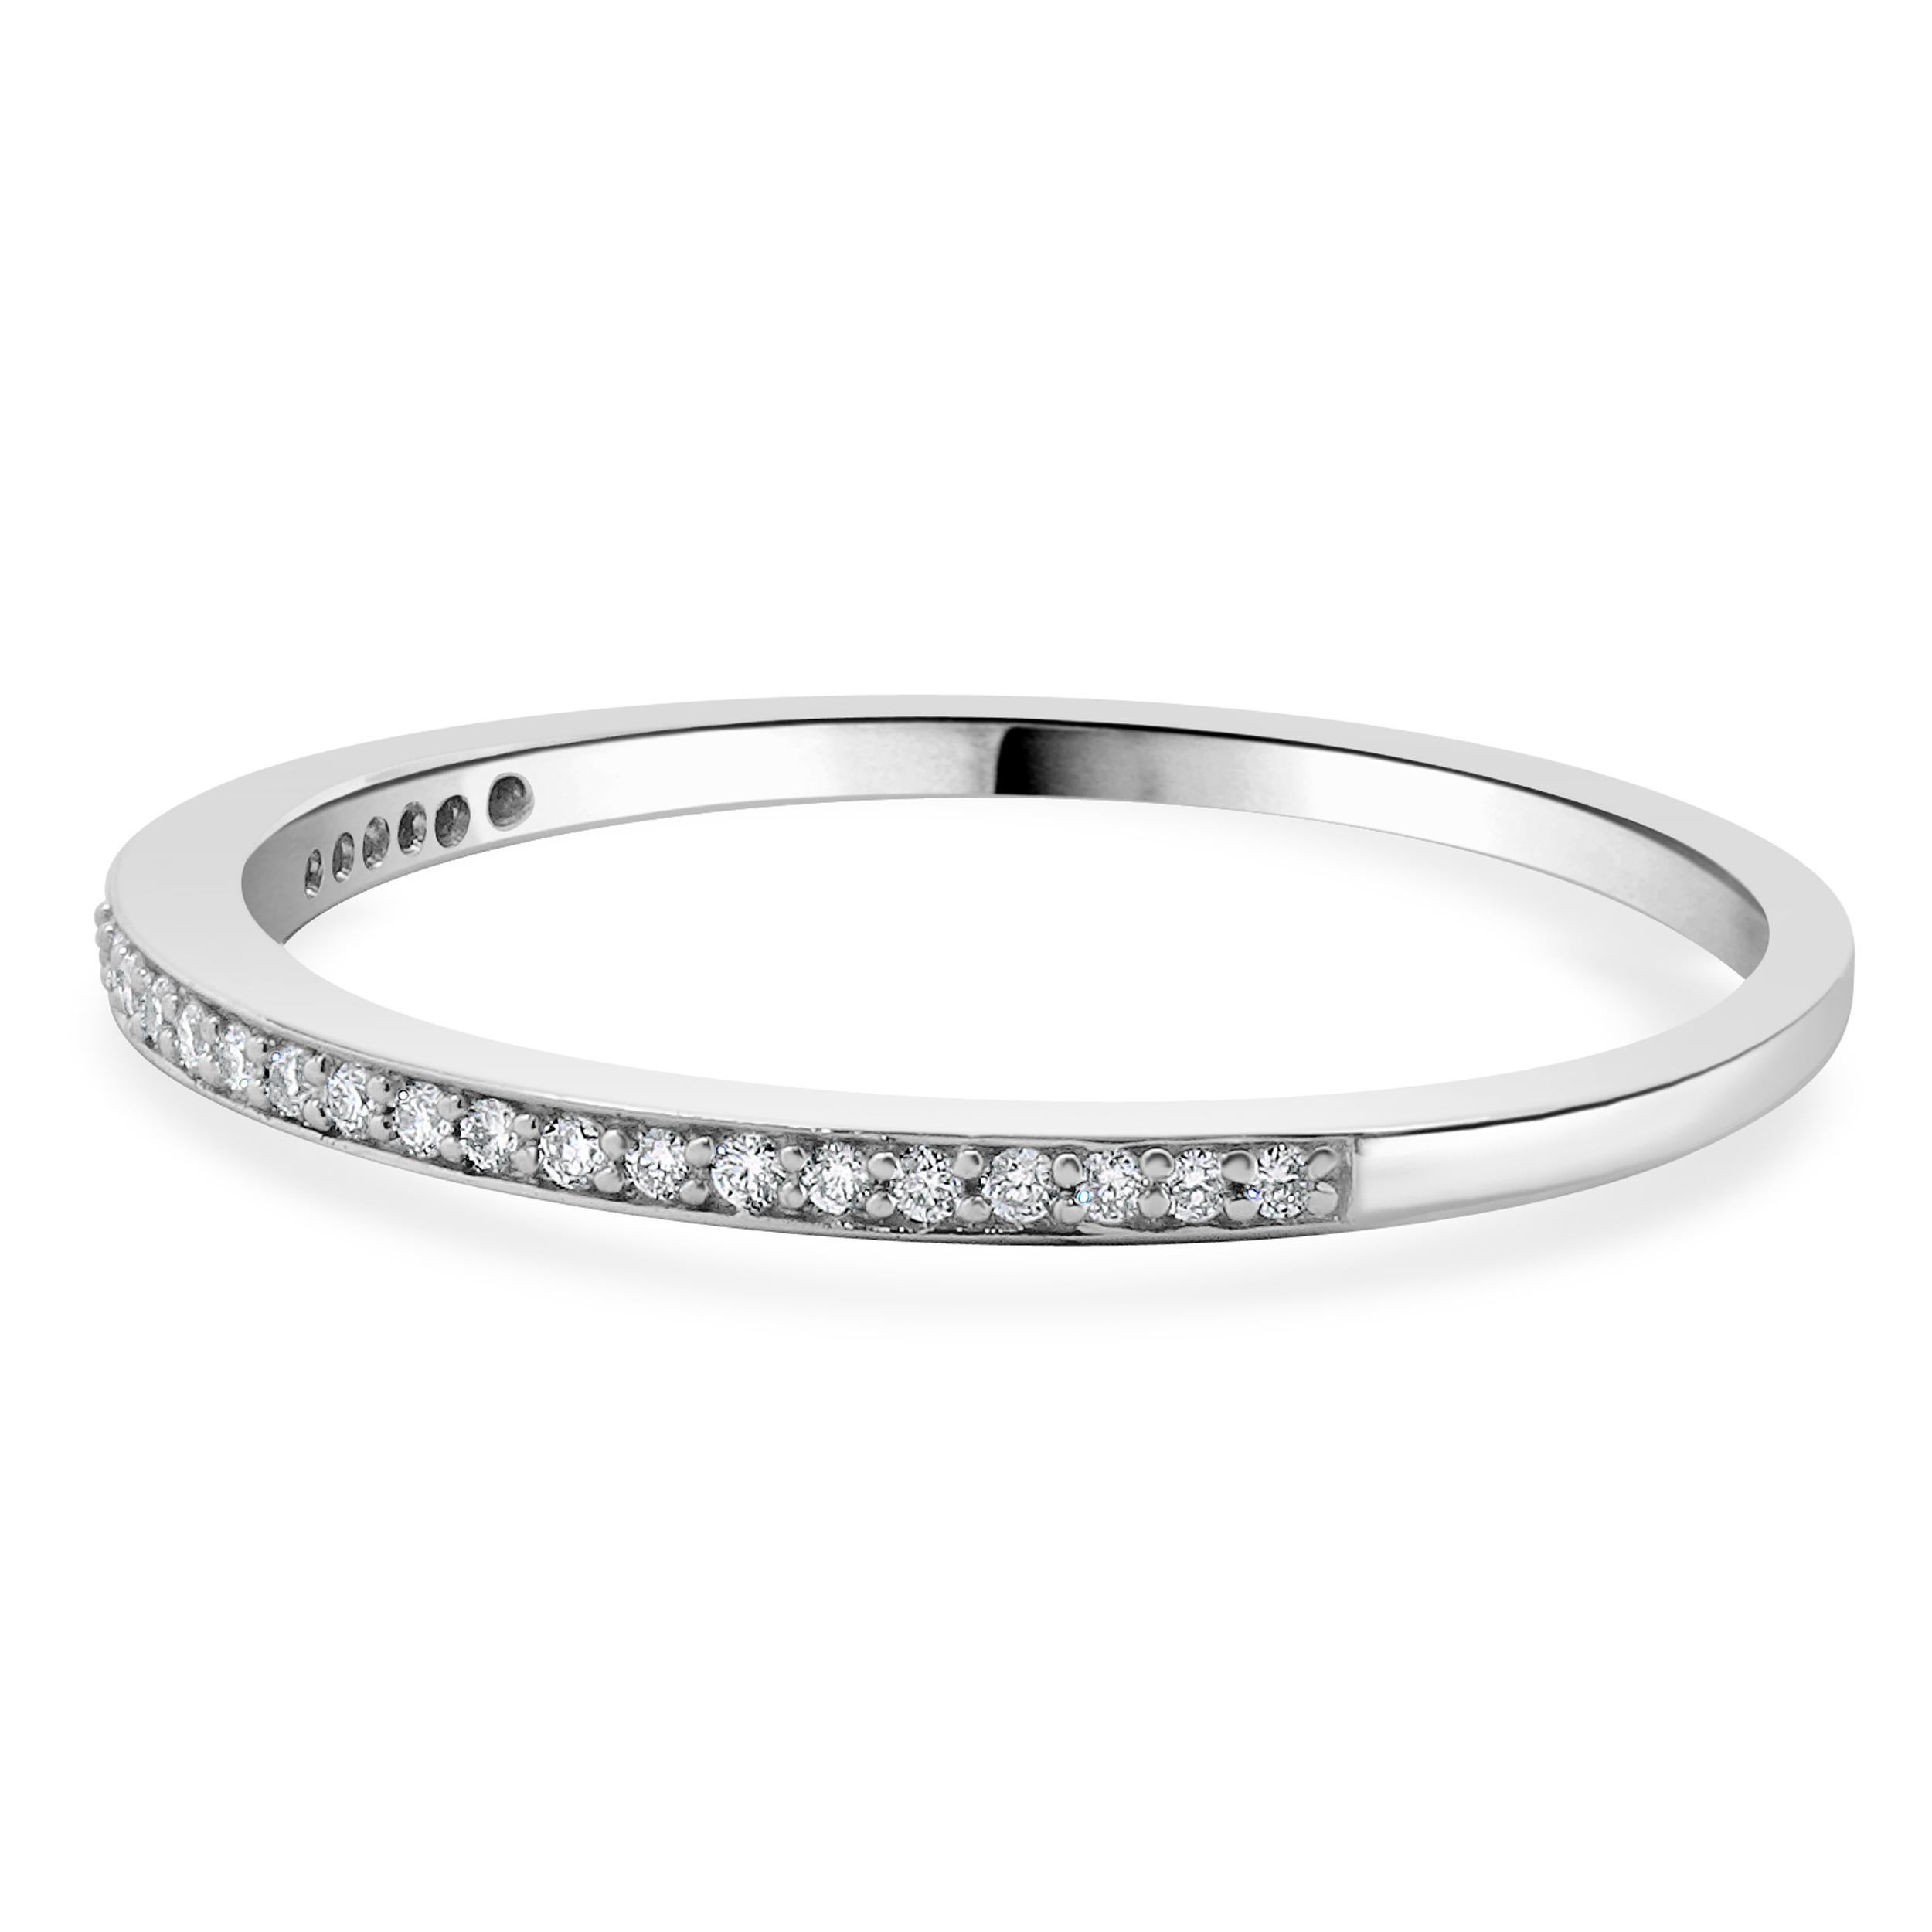 Designer: Custom
Material: 18K white gold
Diamonds: 28 round brilliant cut = 0.10cttw
Color: G
Clarity: SI1-2
Size: 9.5 sizing available 
Dimensions: ring top measures 1.5mm in width
Weight: 1.78 grams
